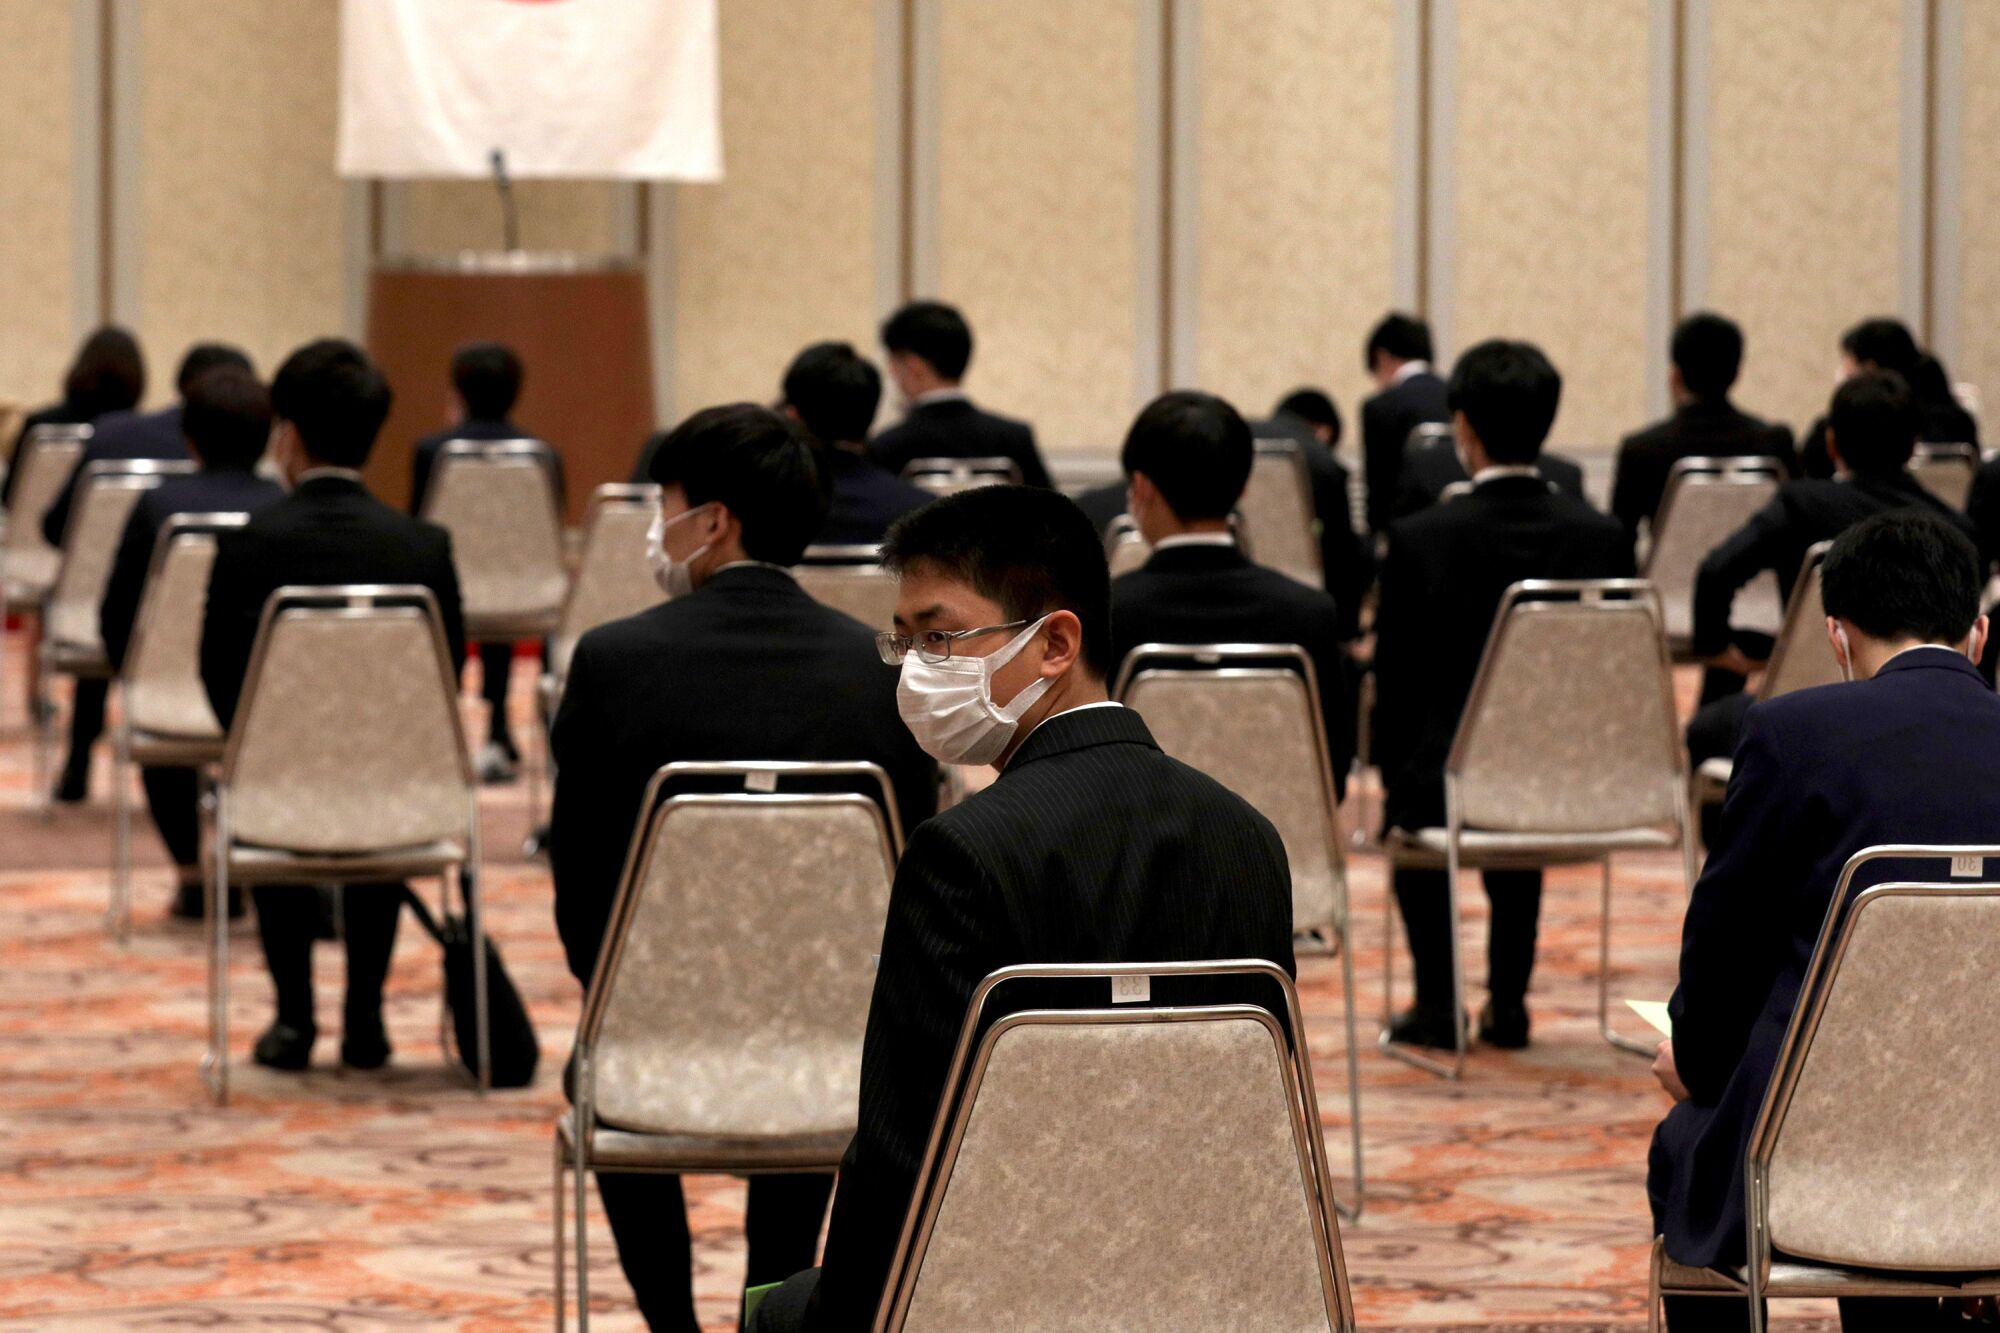 JAPAN: New employees wear face masks as they observe social distancing during an initiation ceremony at the Himeji Chamber of Commerce and Industry hall on Wednesday in Himeji, Japan.